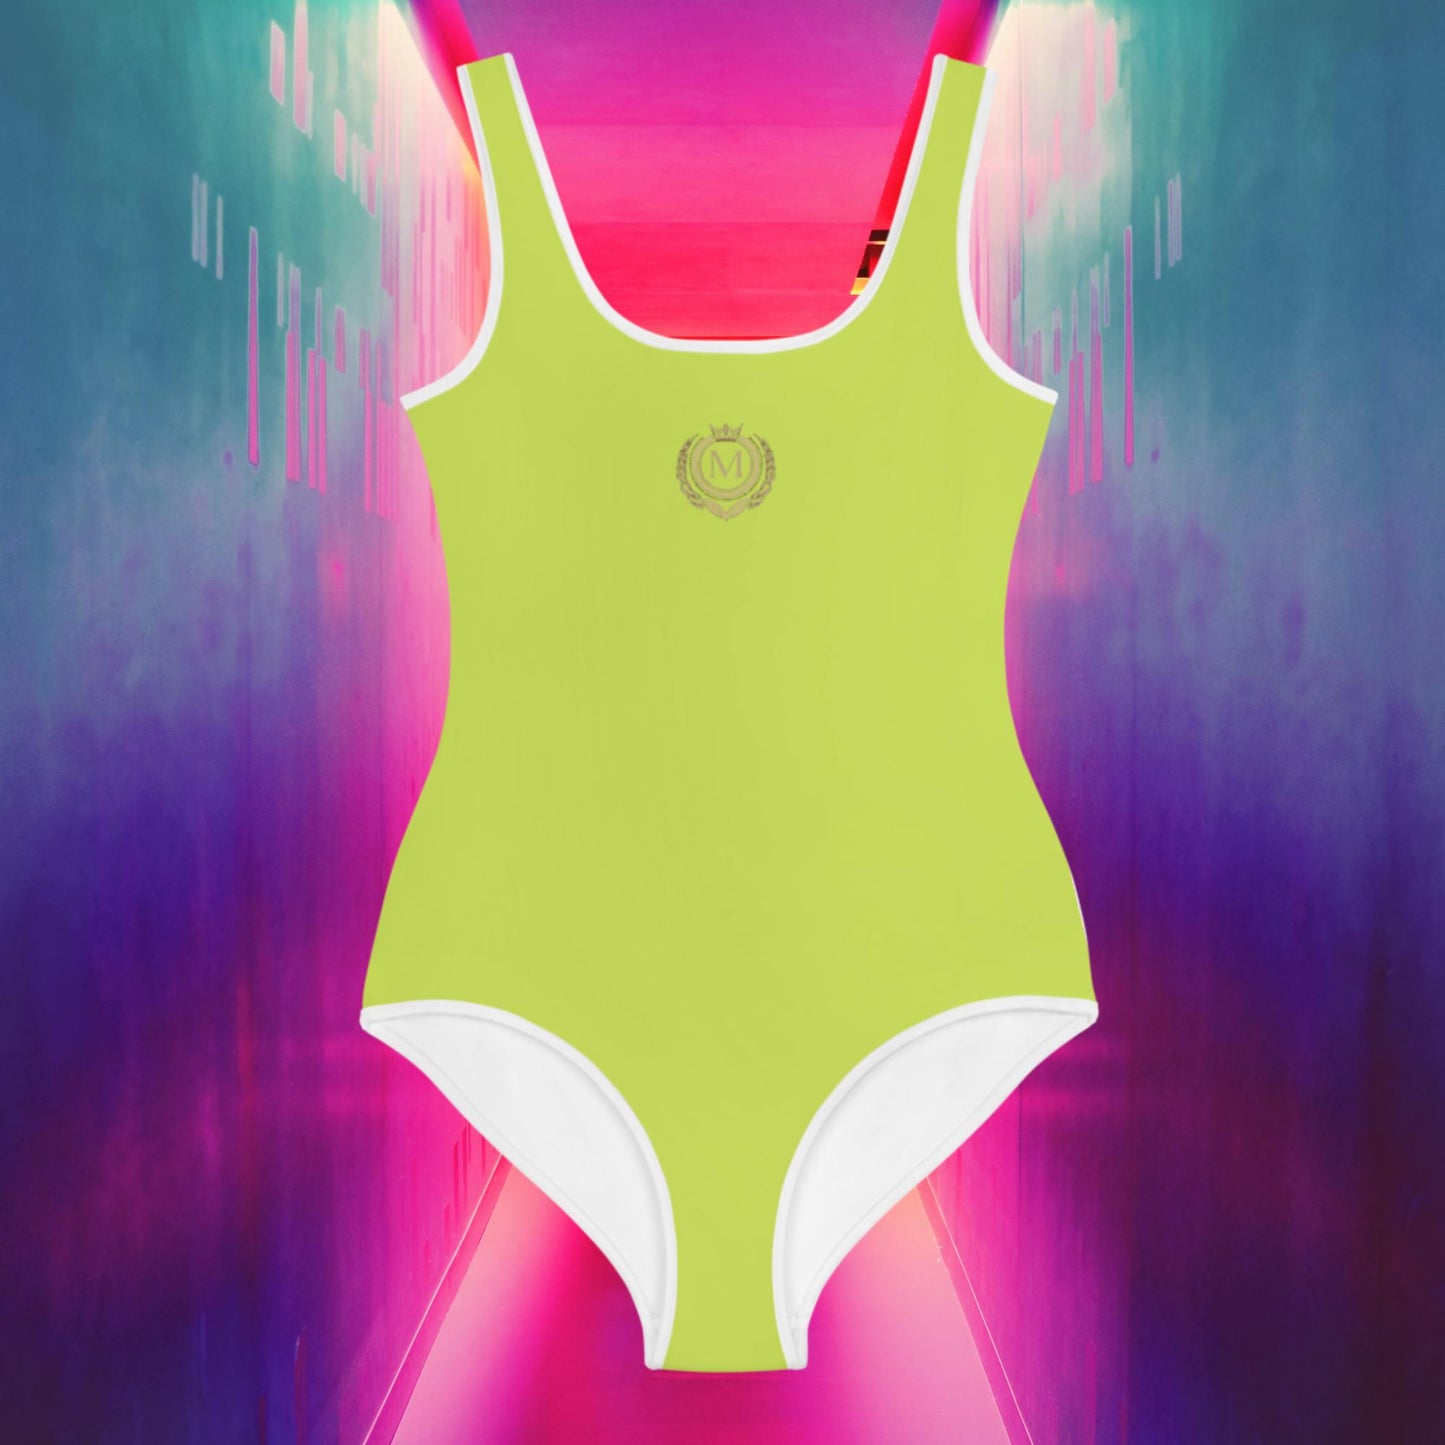 Classic Monarch Lime Green Girl's Youth Swimsuit